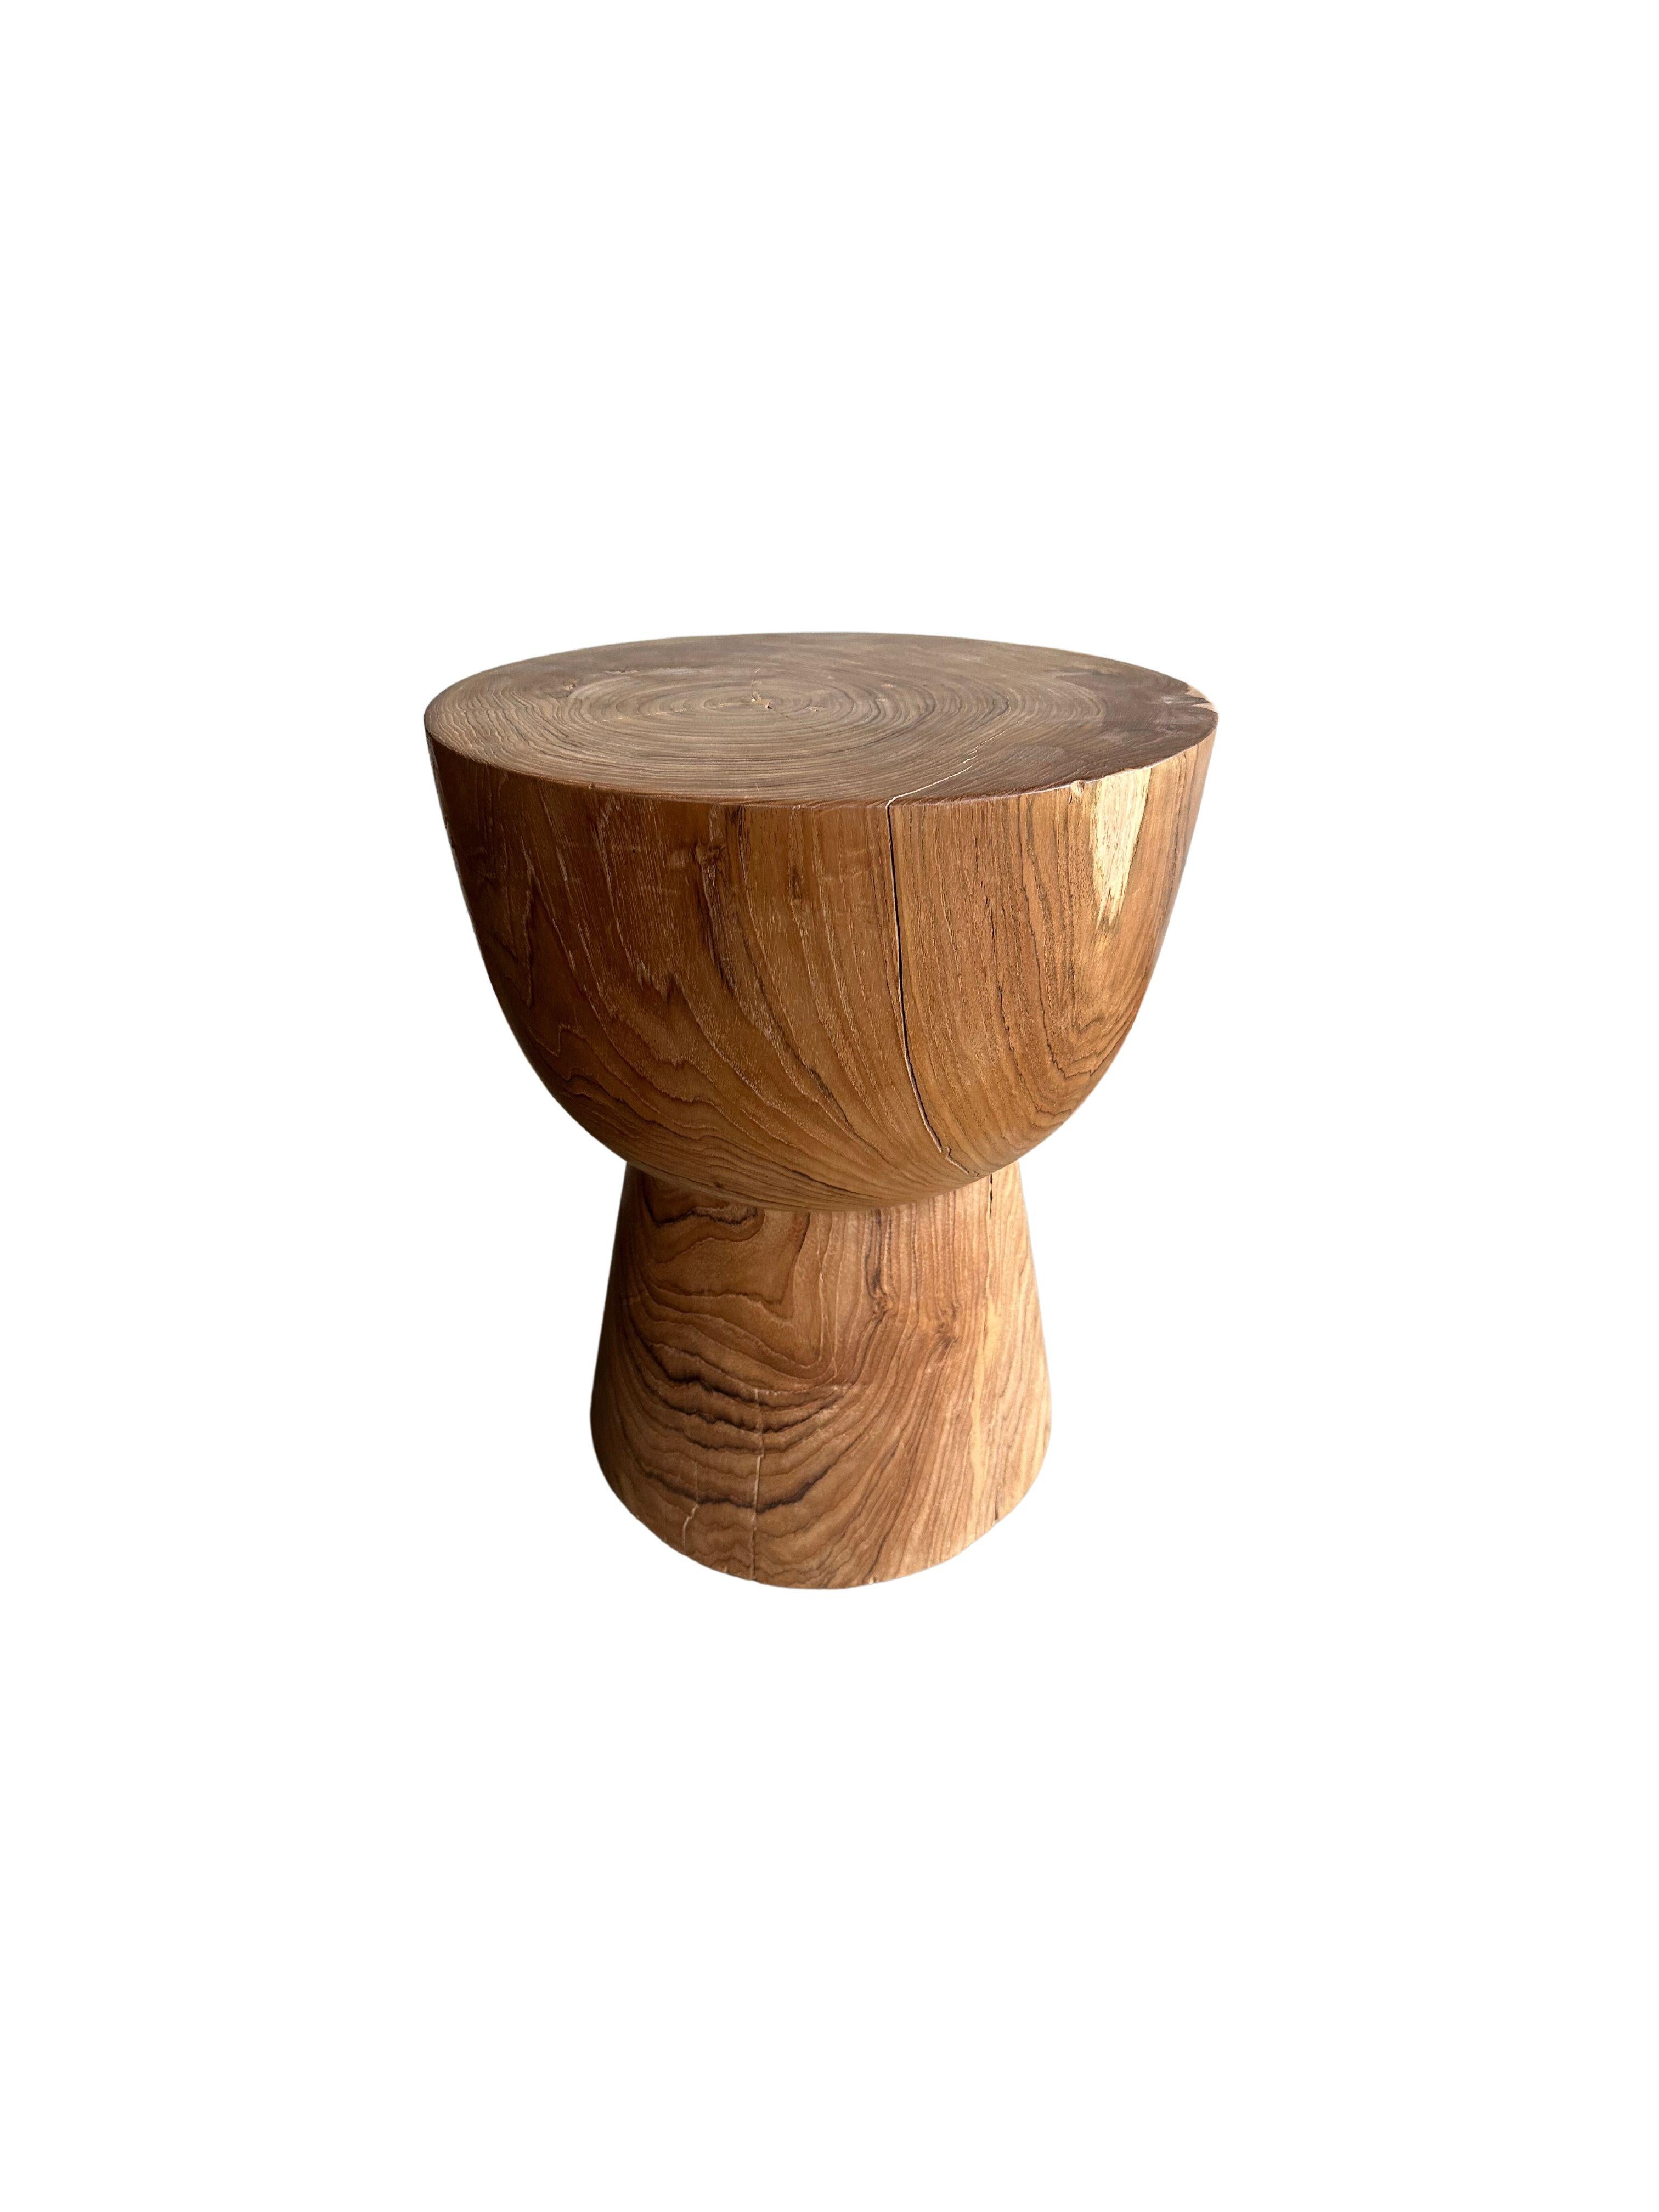 Indonesian Sculptural Teak Wood Side Table, with Stunning Wood Textures, Modern Organic